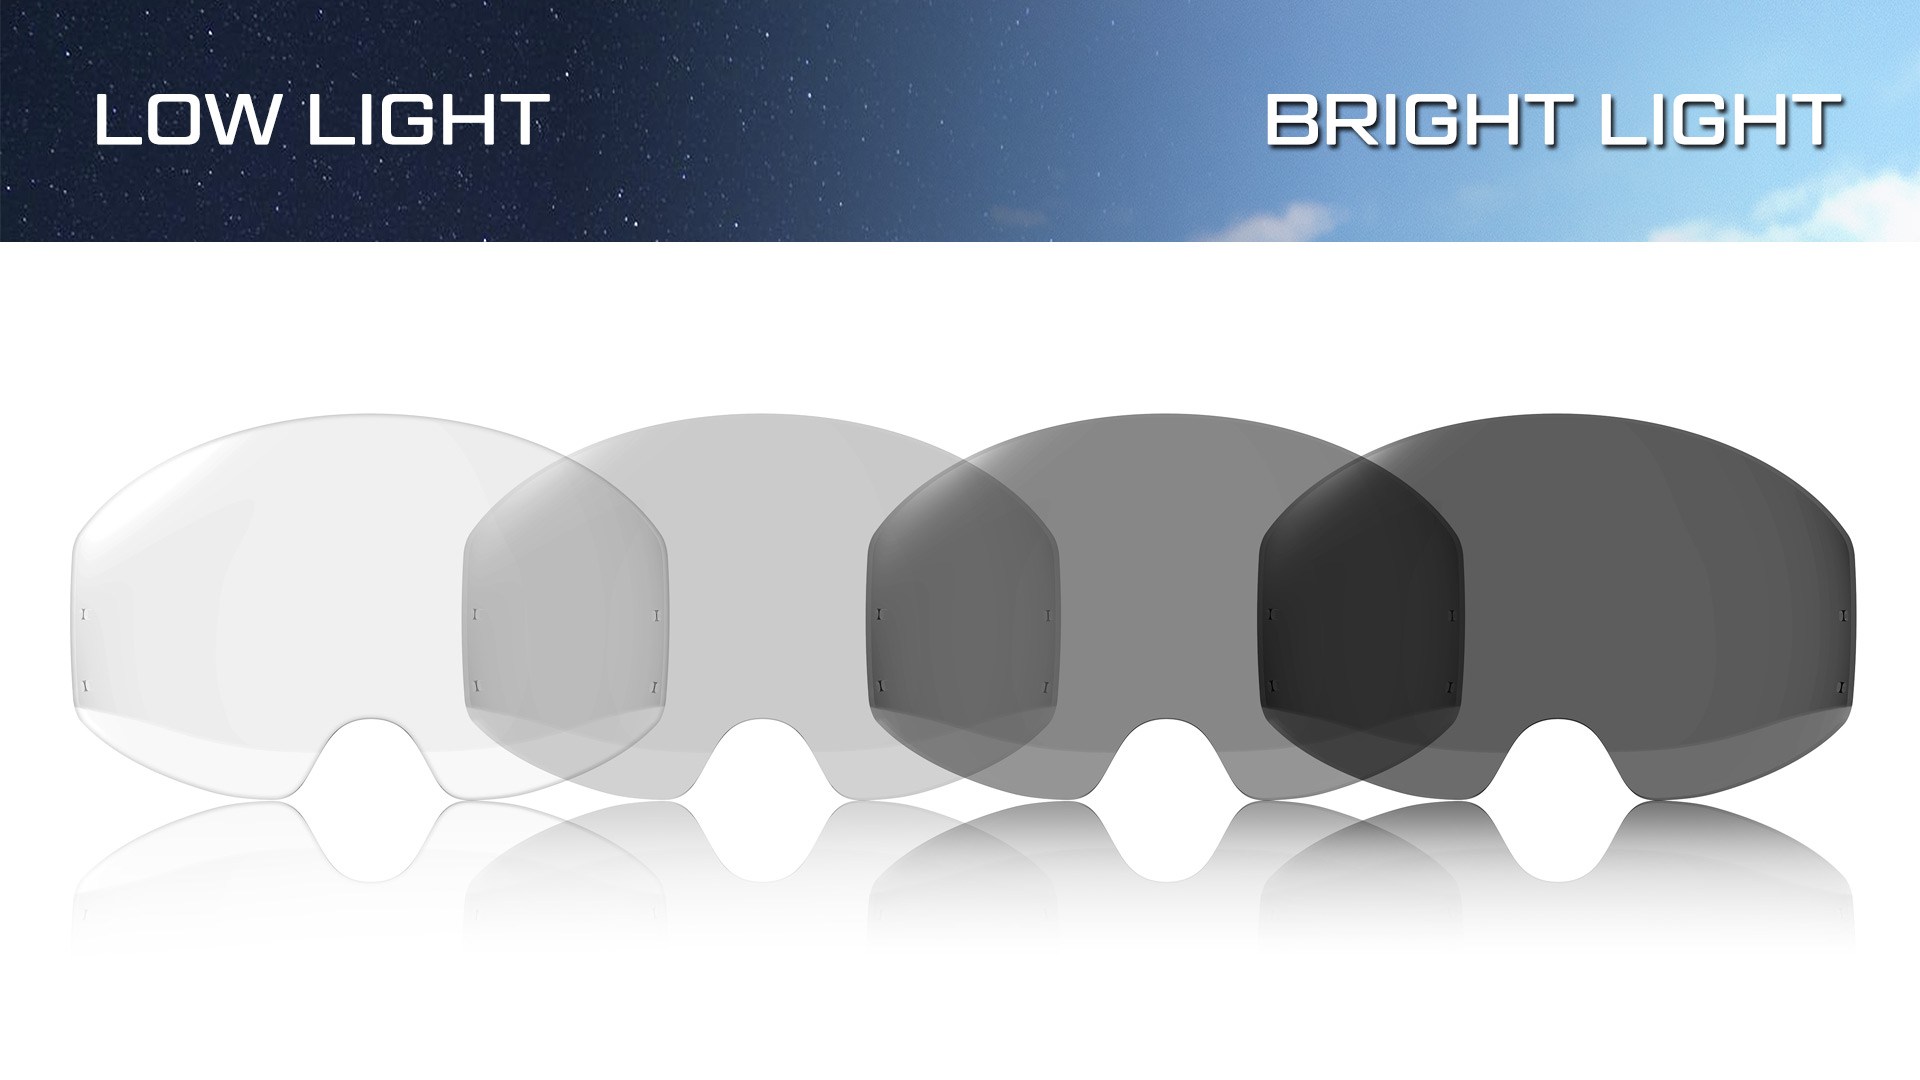 We're Looking Forward to Sharing More About Our Photochromic Technology!